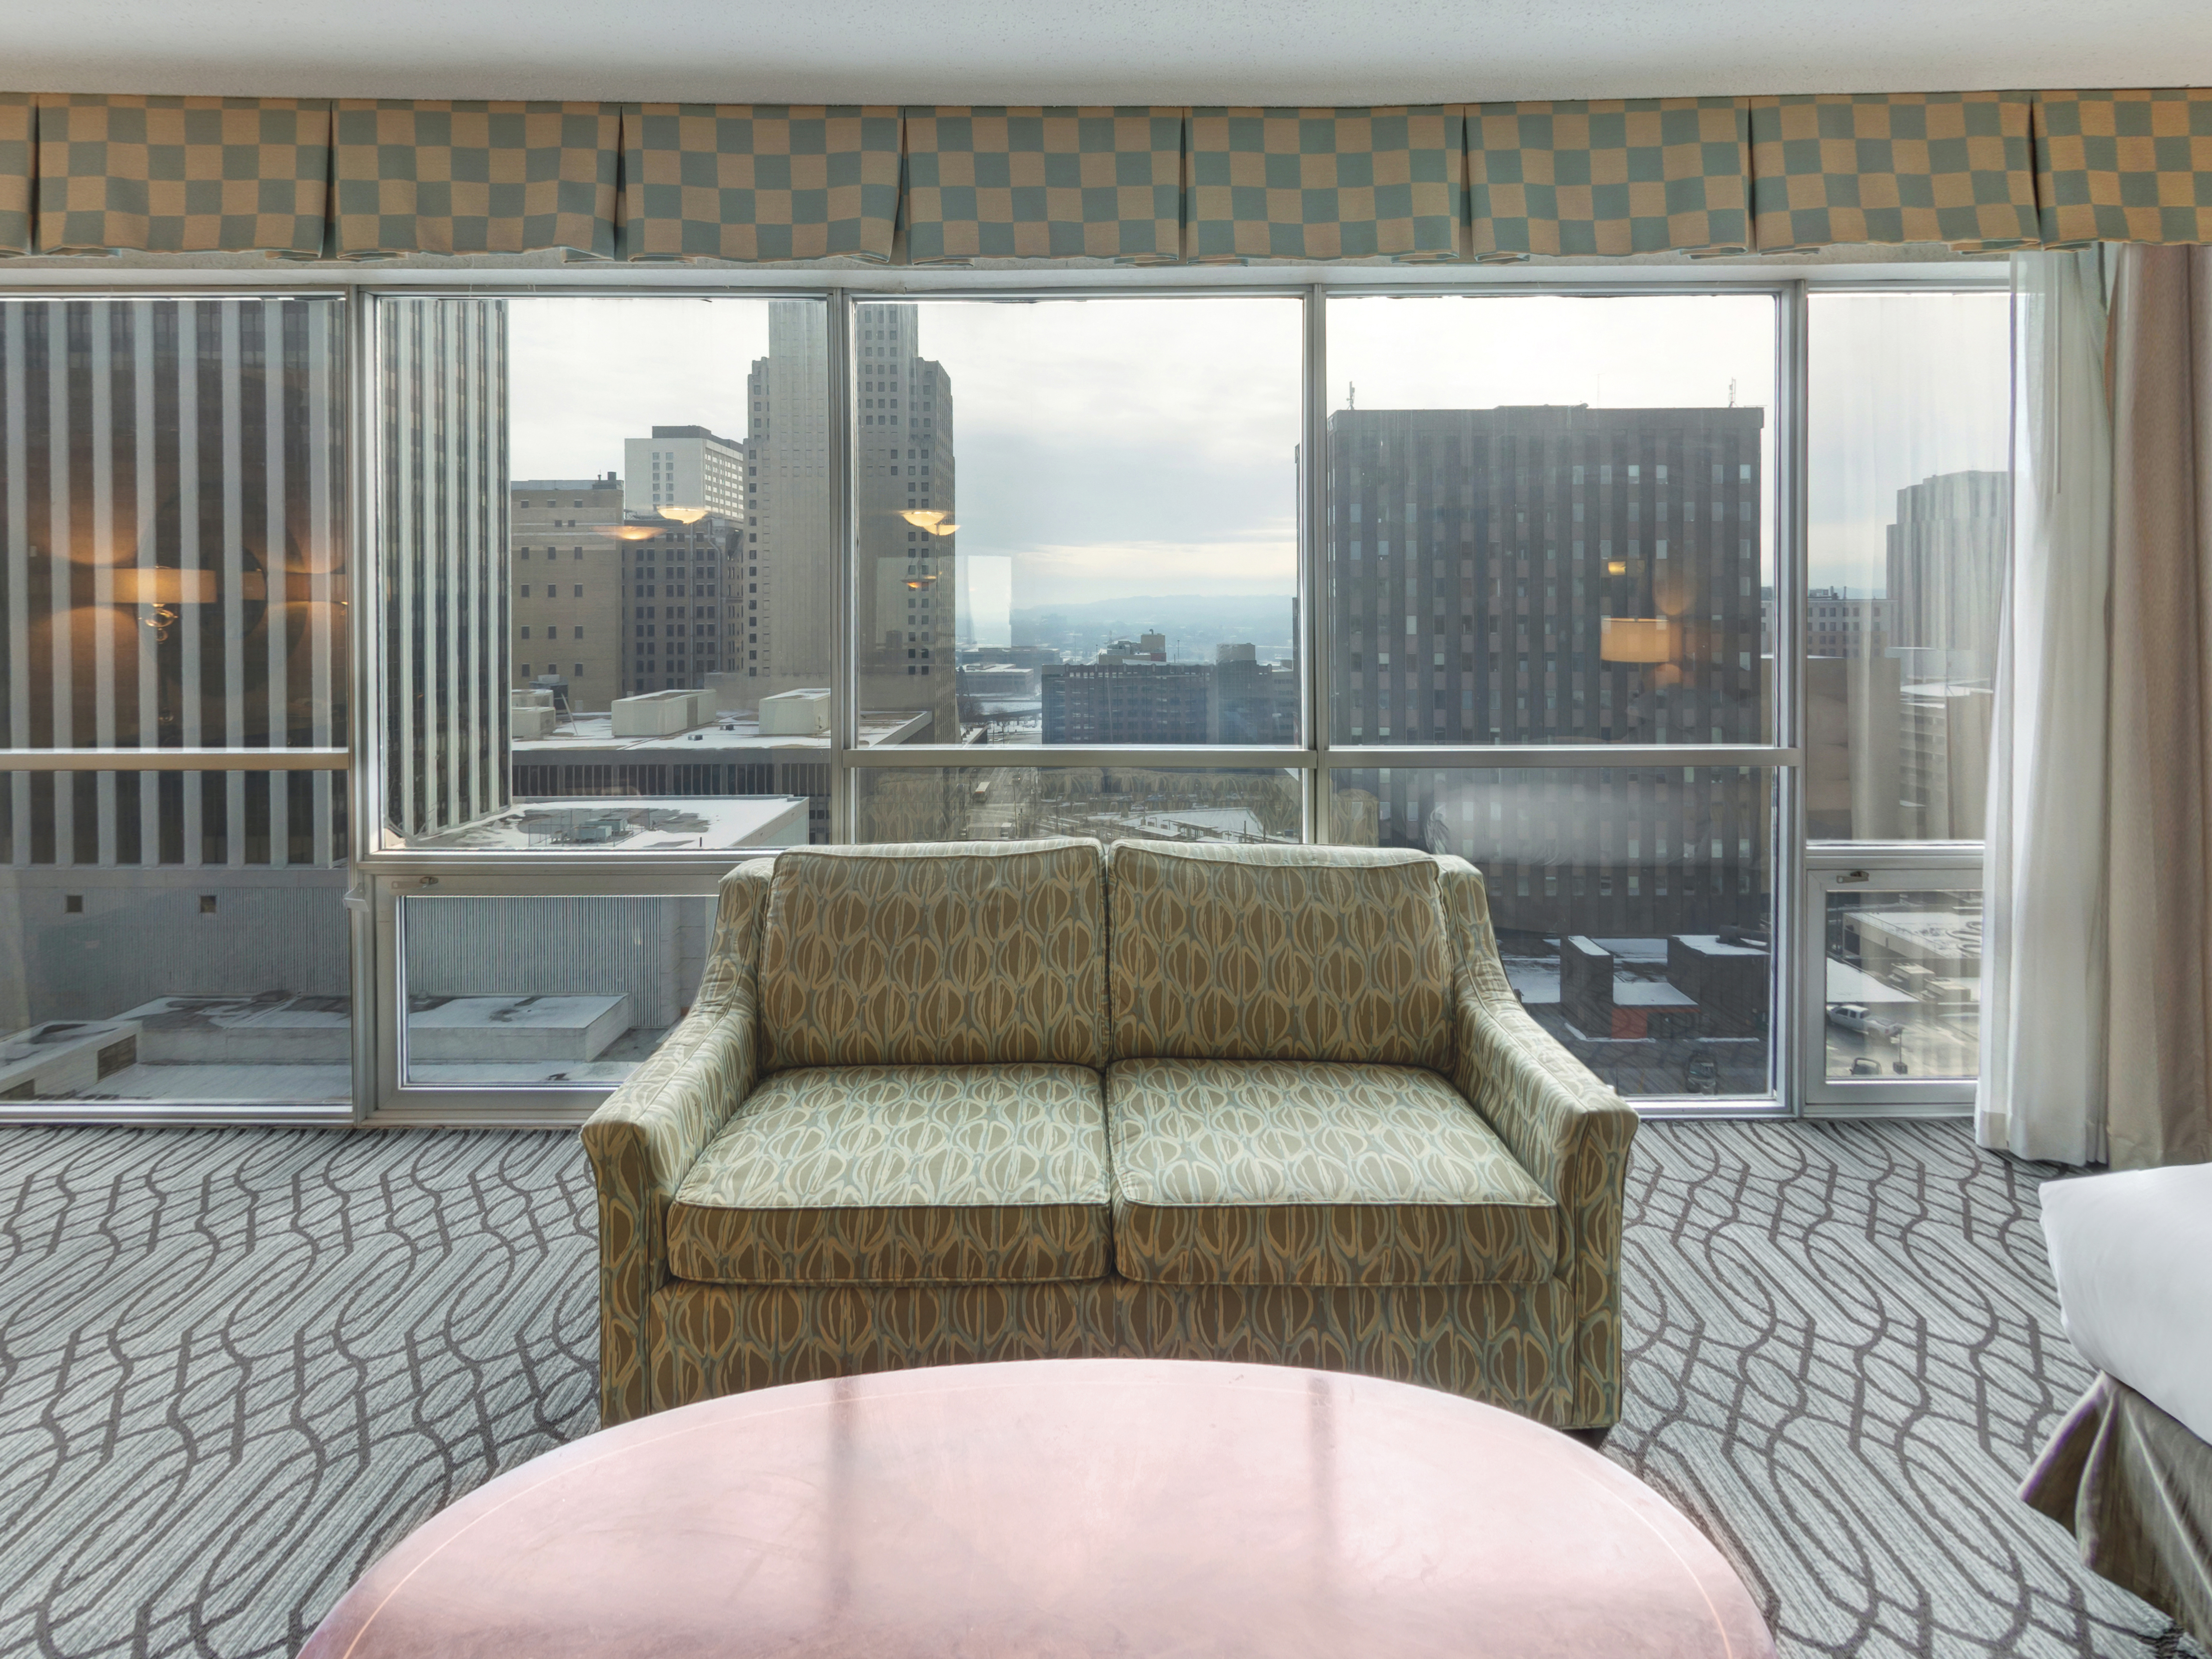 Guest Suite lounge area, window view of the city